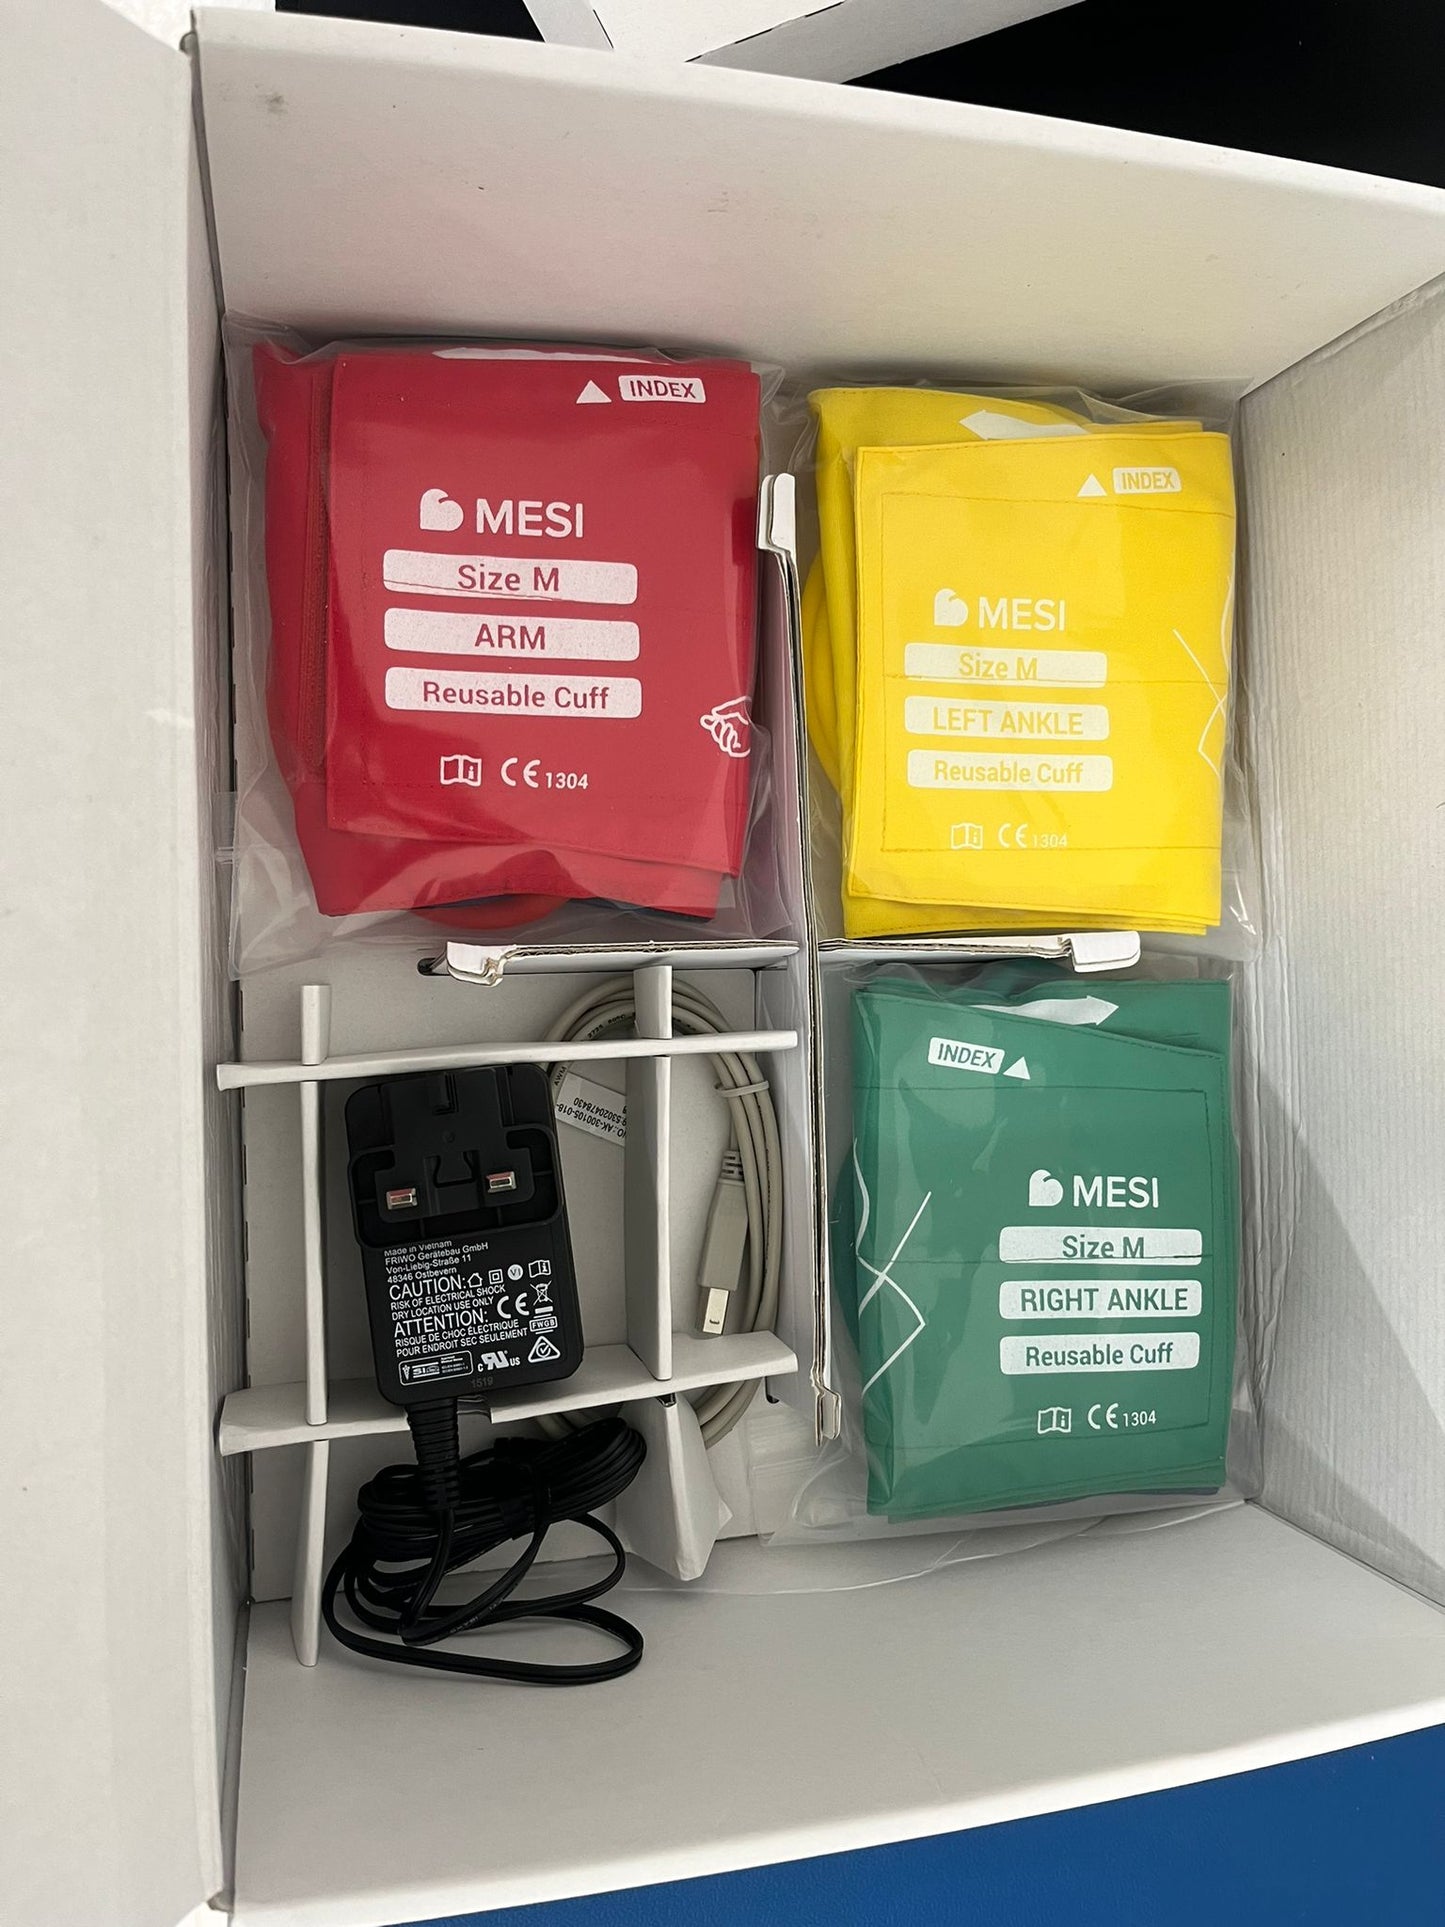 Reconditioned MESI ABPI MD including medium cuffs